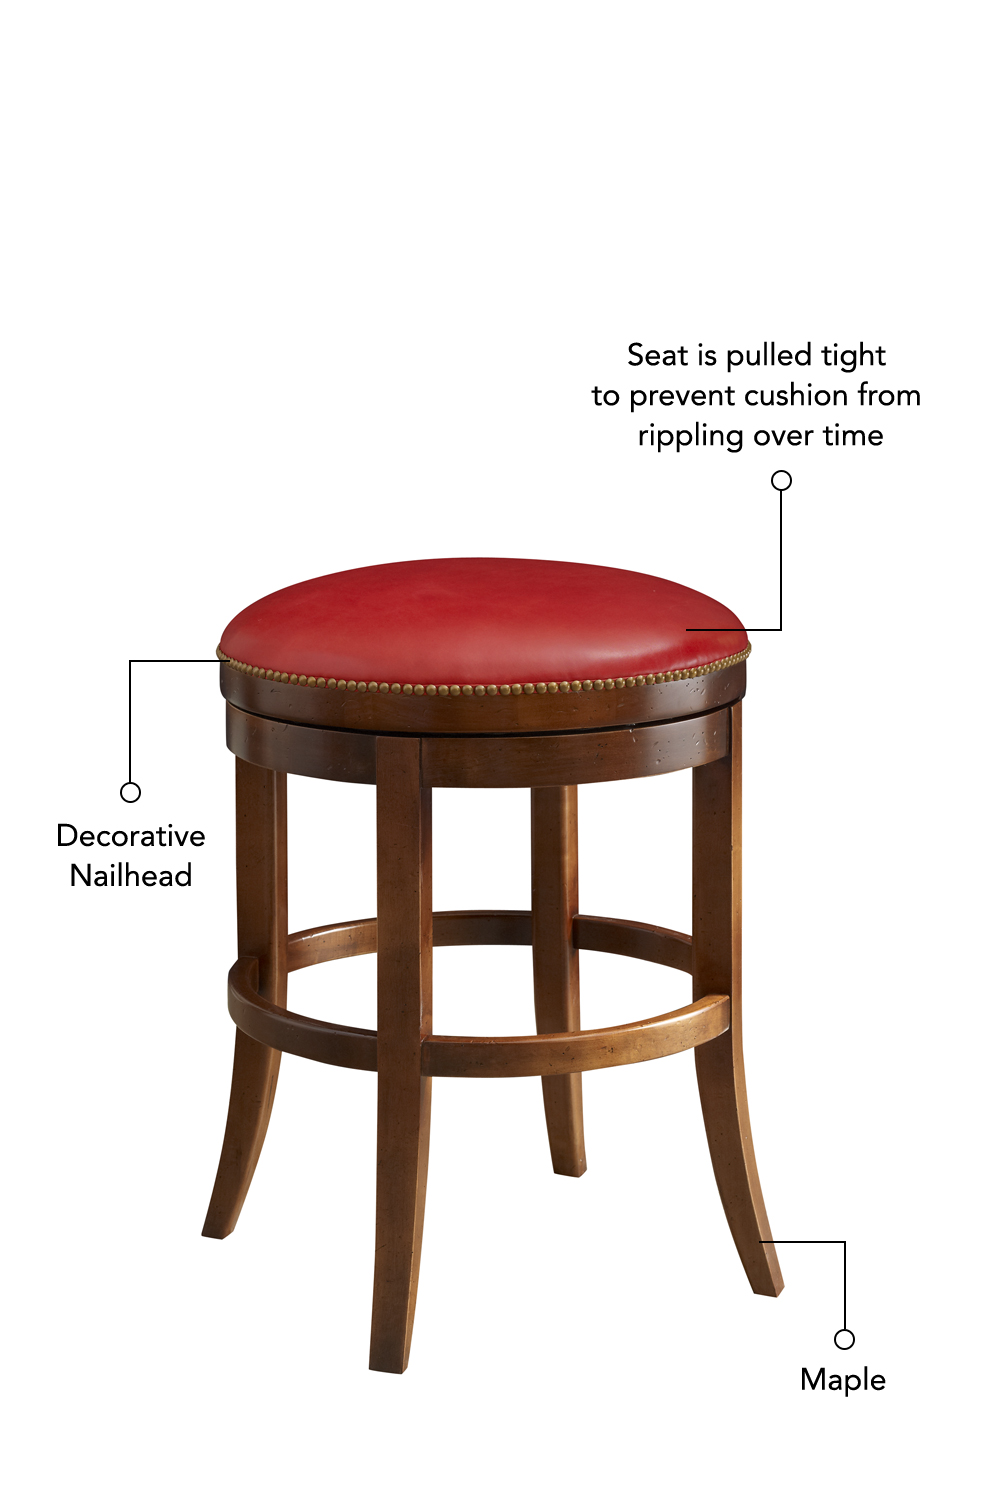 Seat is pulled tight to prevent cushion from rippling over time, includes decorative nailheads outlining the seat, and a maple base.